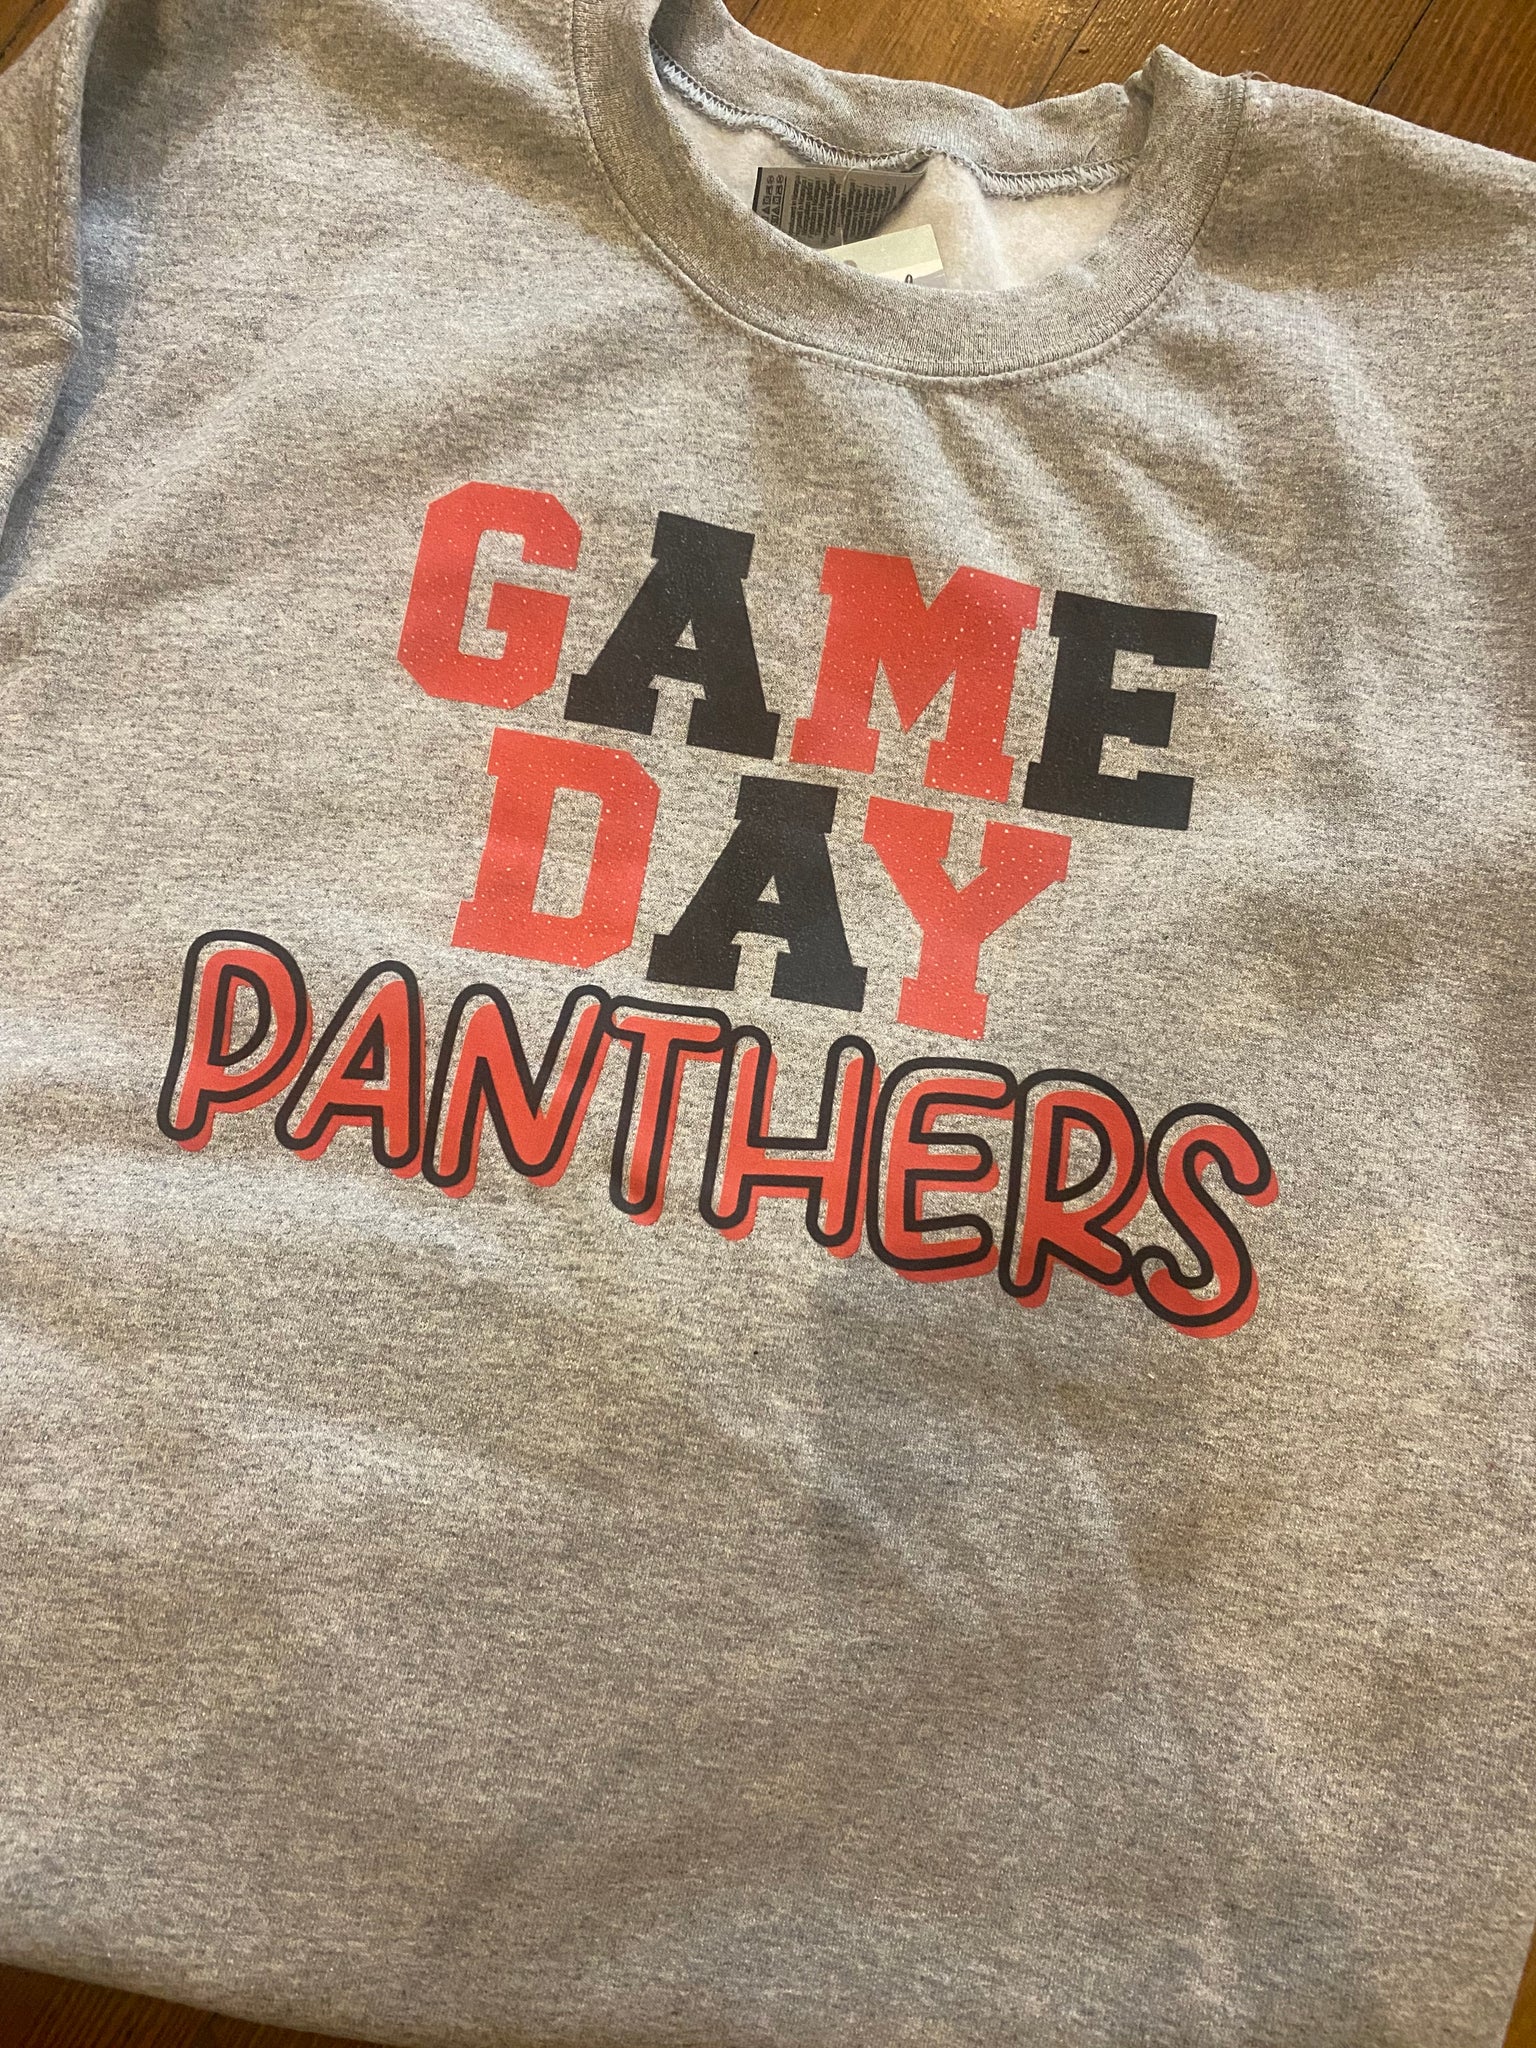 Game Day Panthers tee